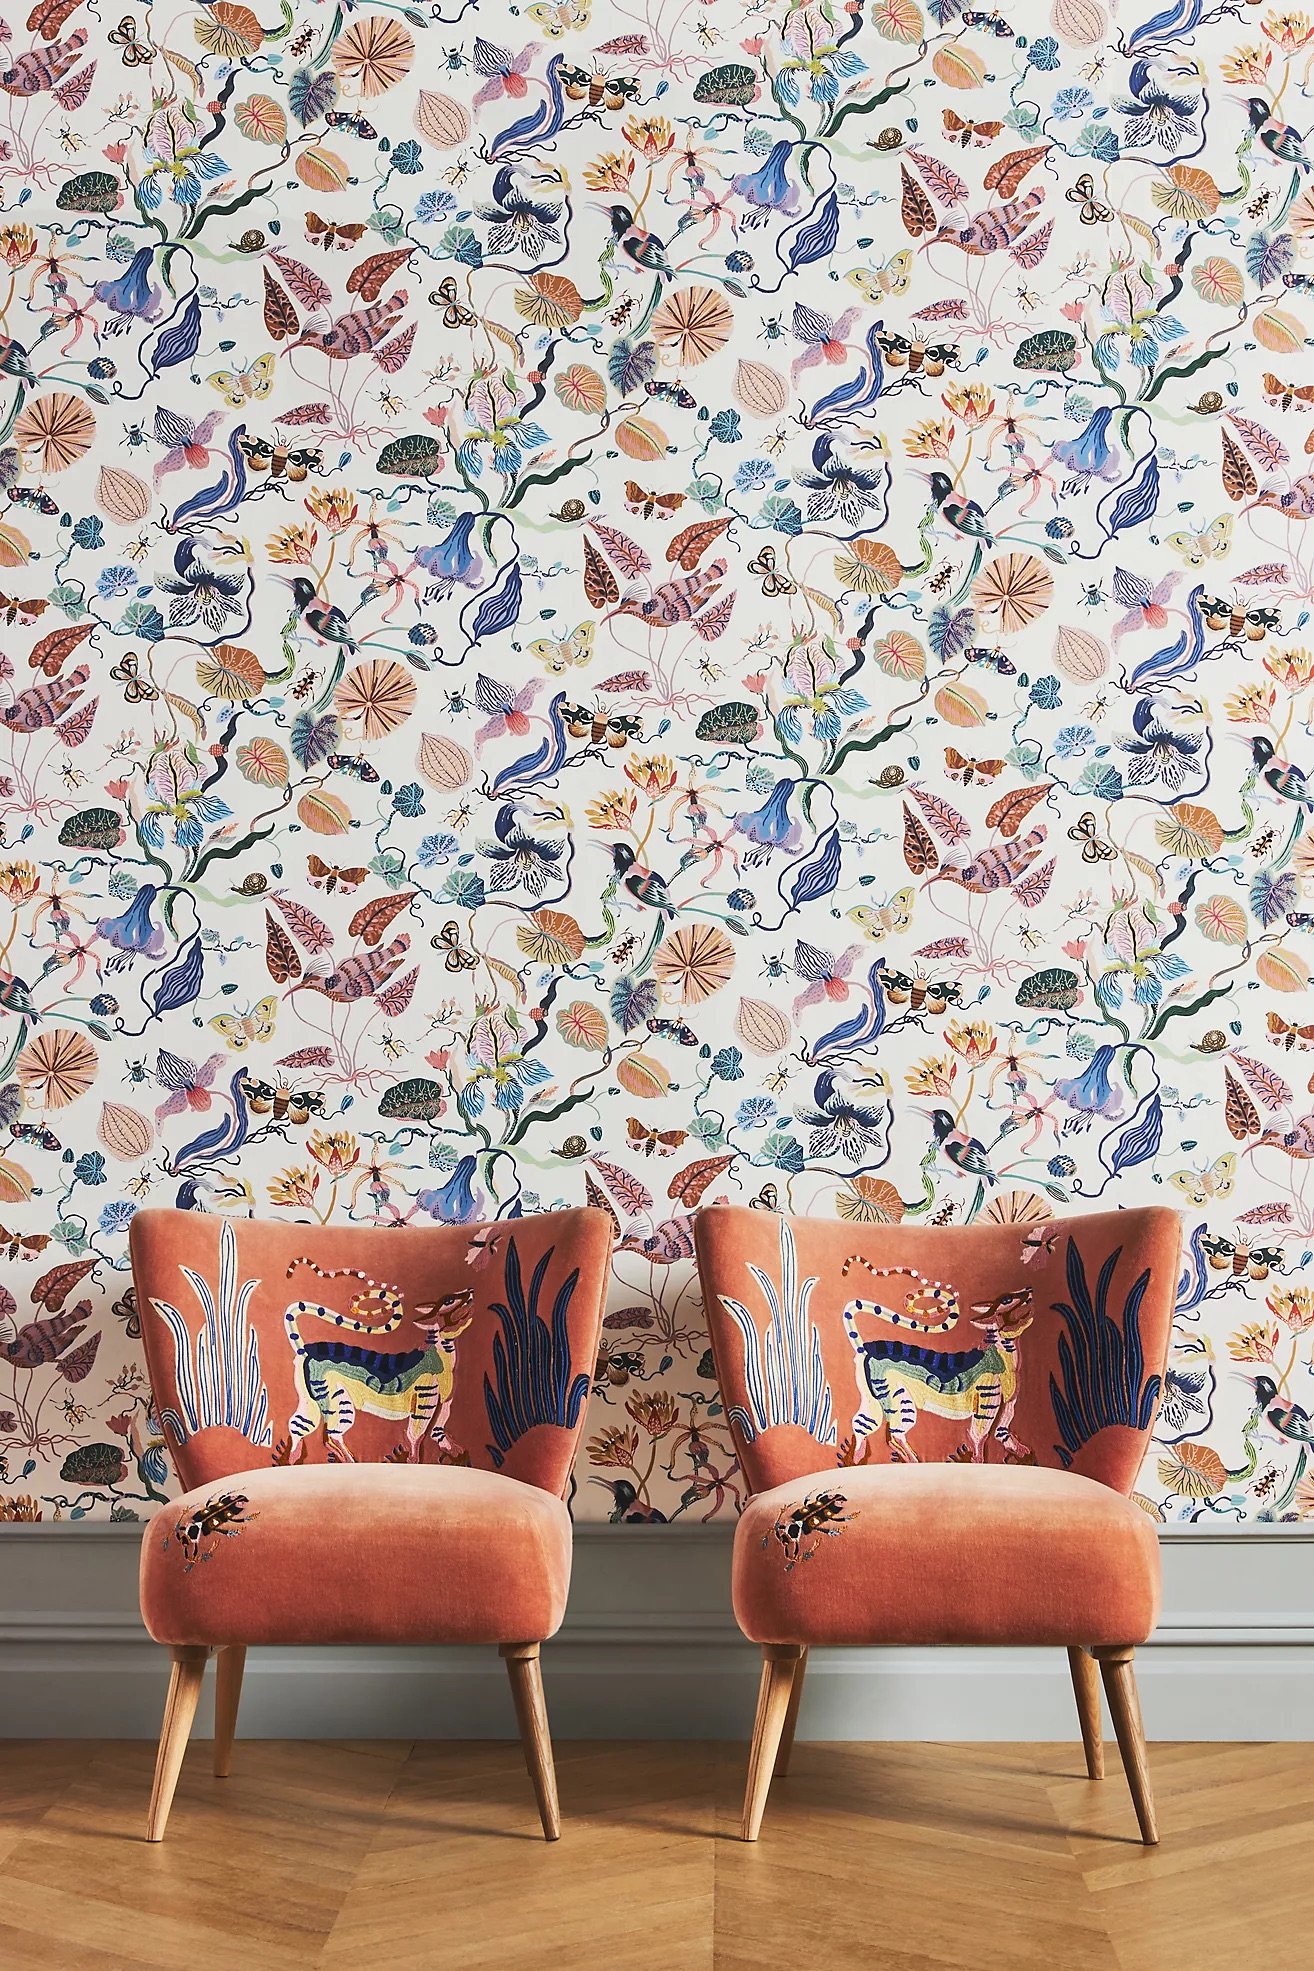 Anthropologie velvet accent chairs and wallpaper by Sarah Gordon